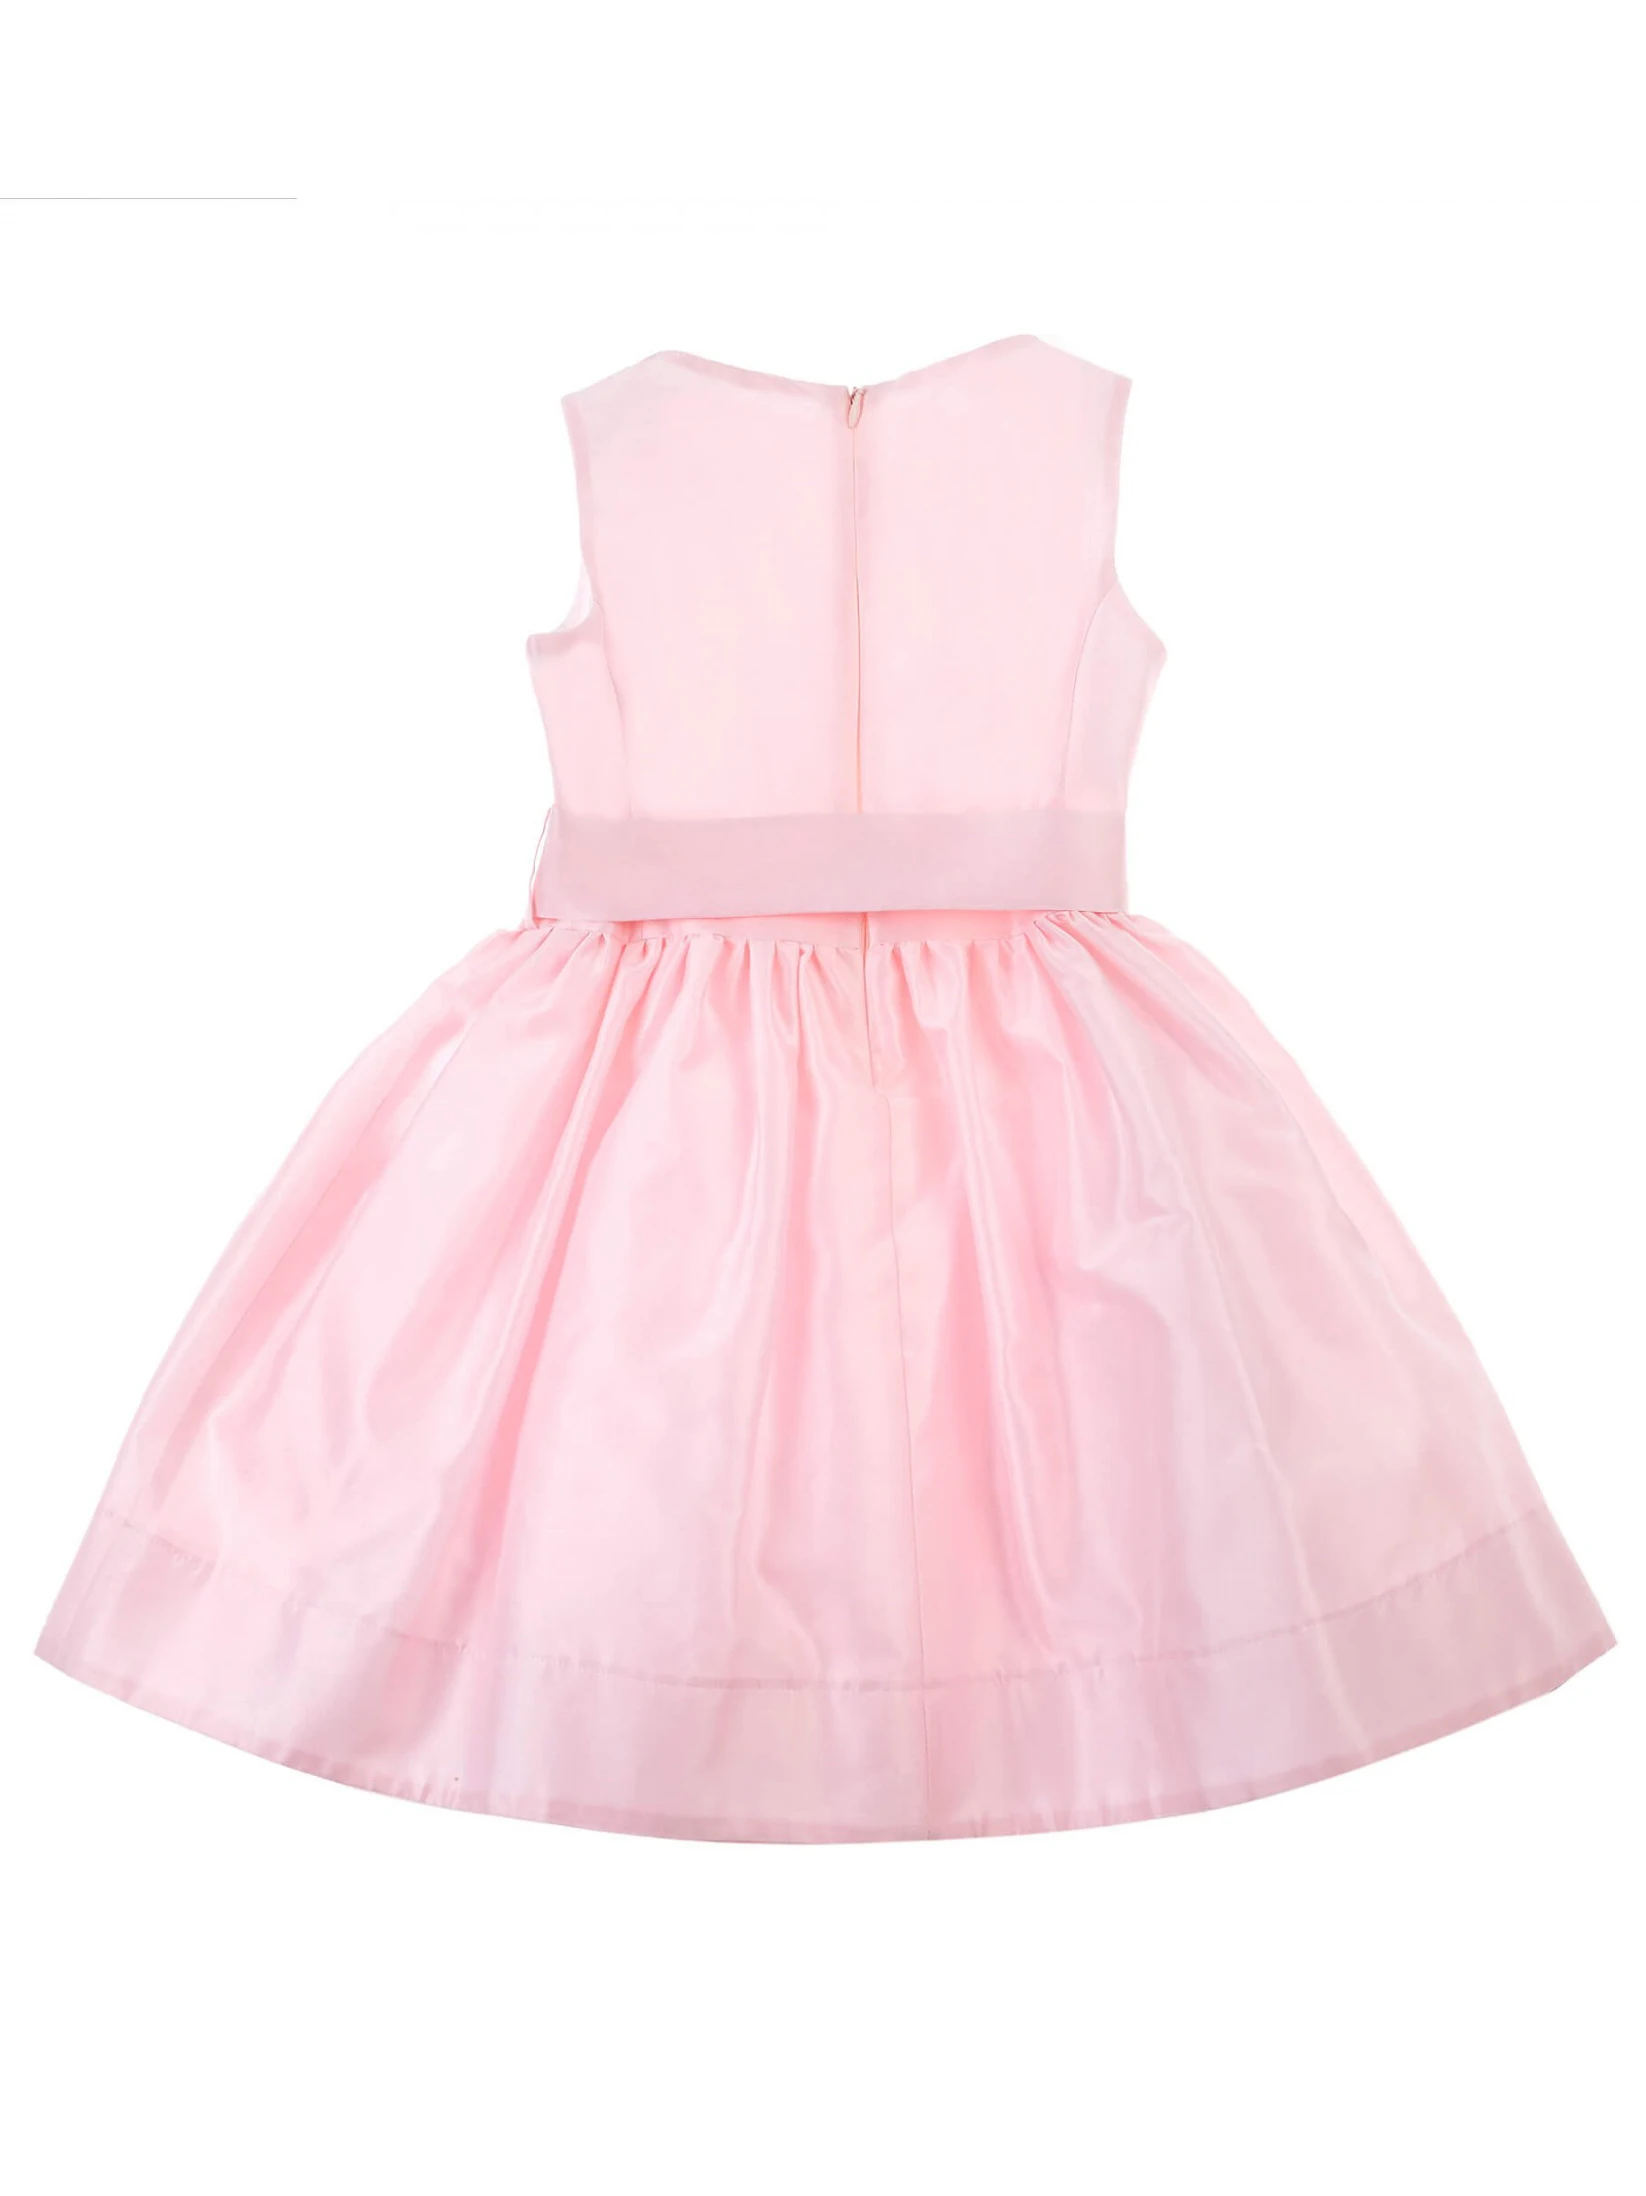 New design European style kids clothing pink sleeveless round neck girls party dress with ruffle pockets